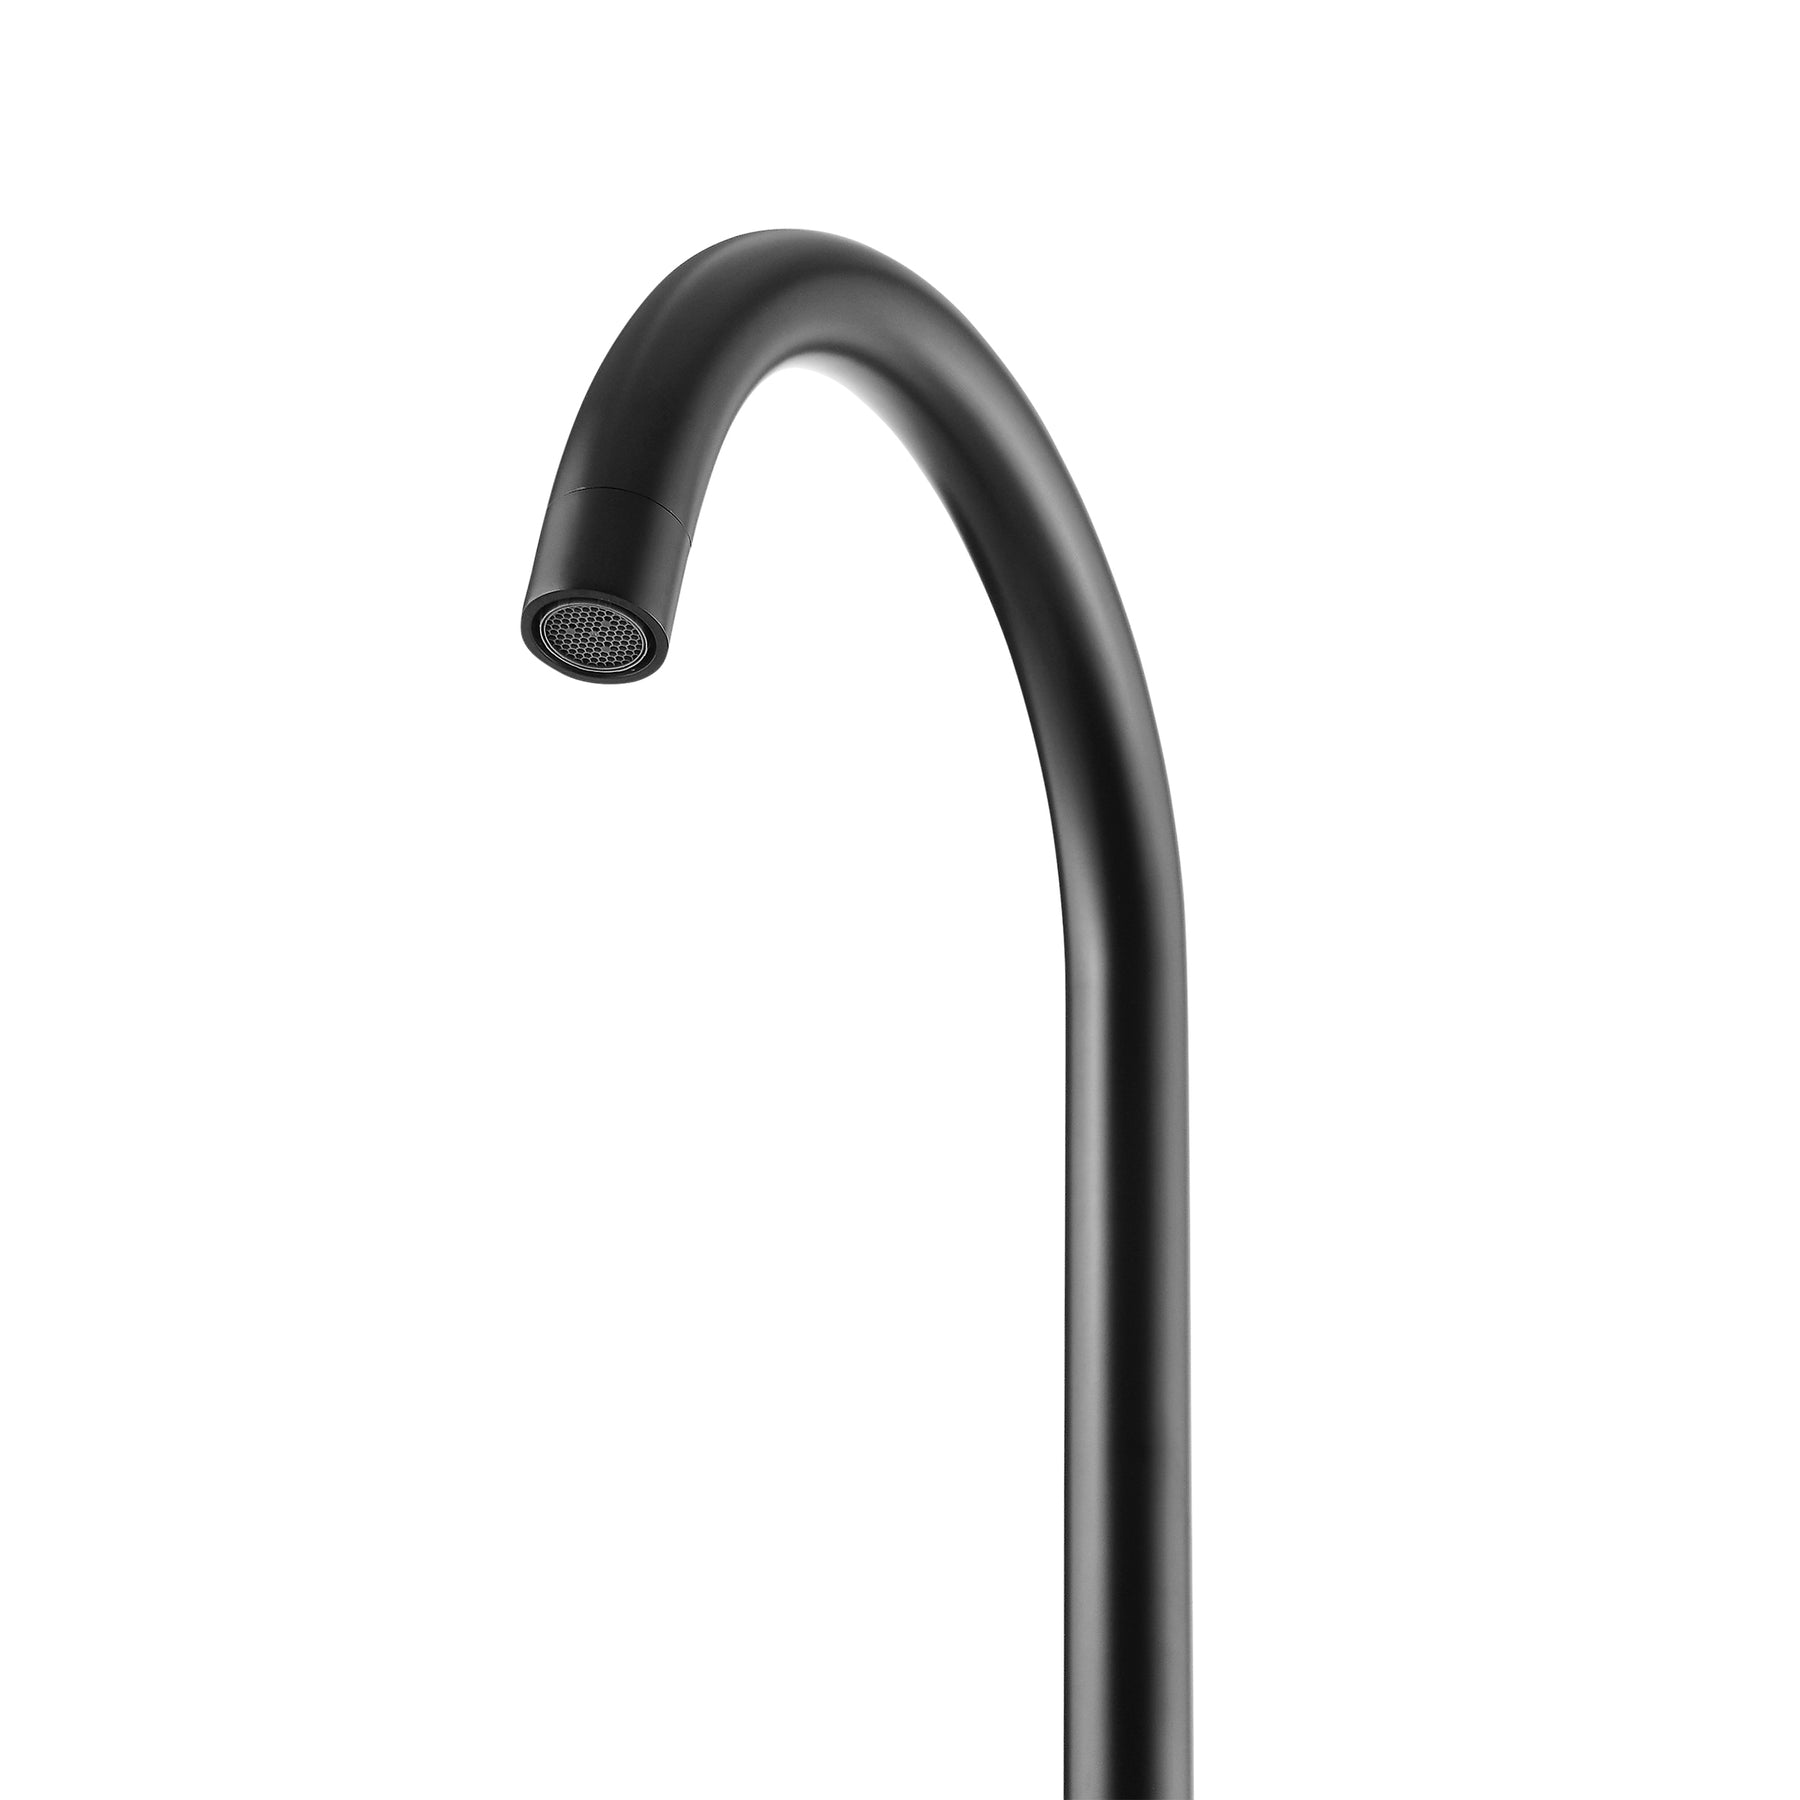 Swiss Madison Daxton 8 in. Widespread, Cross Handle, Bathroom Faucet SM-BF101